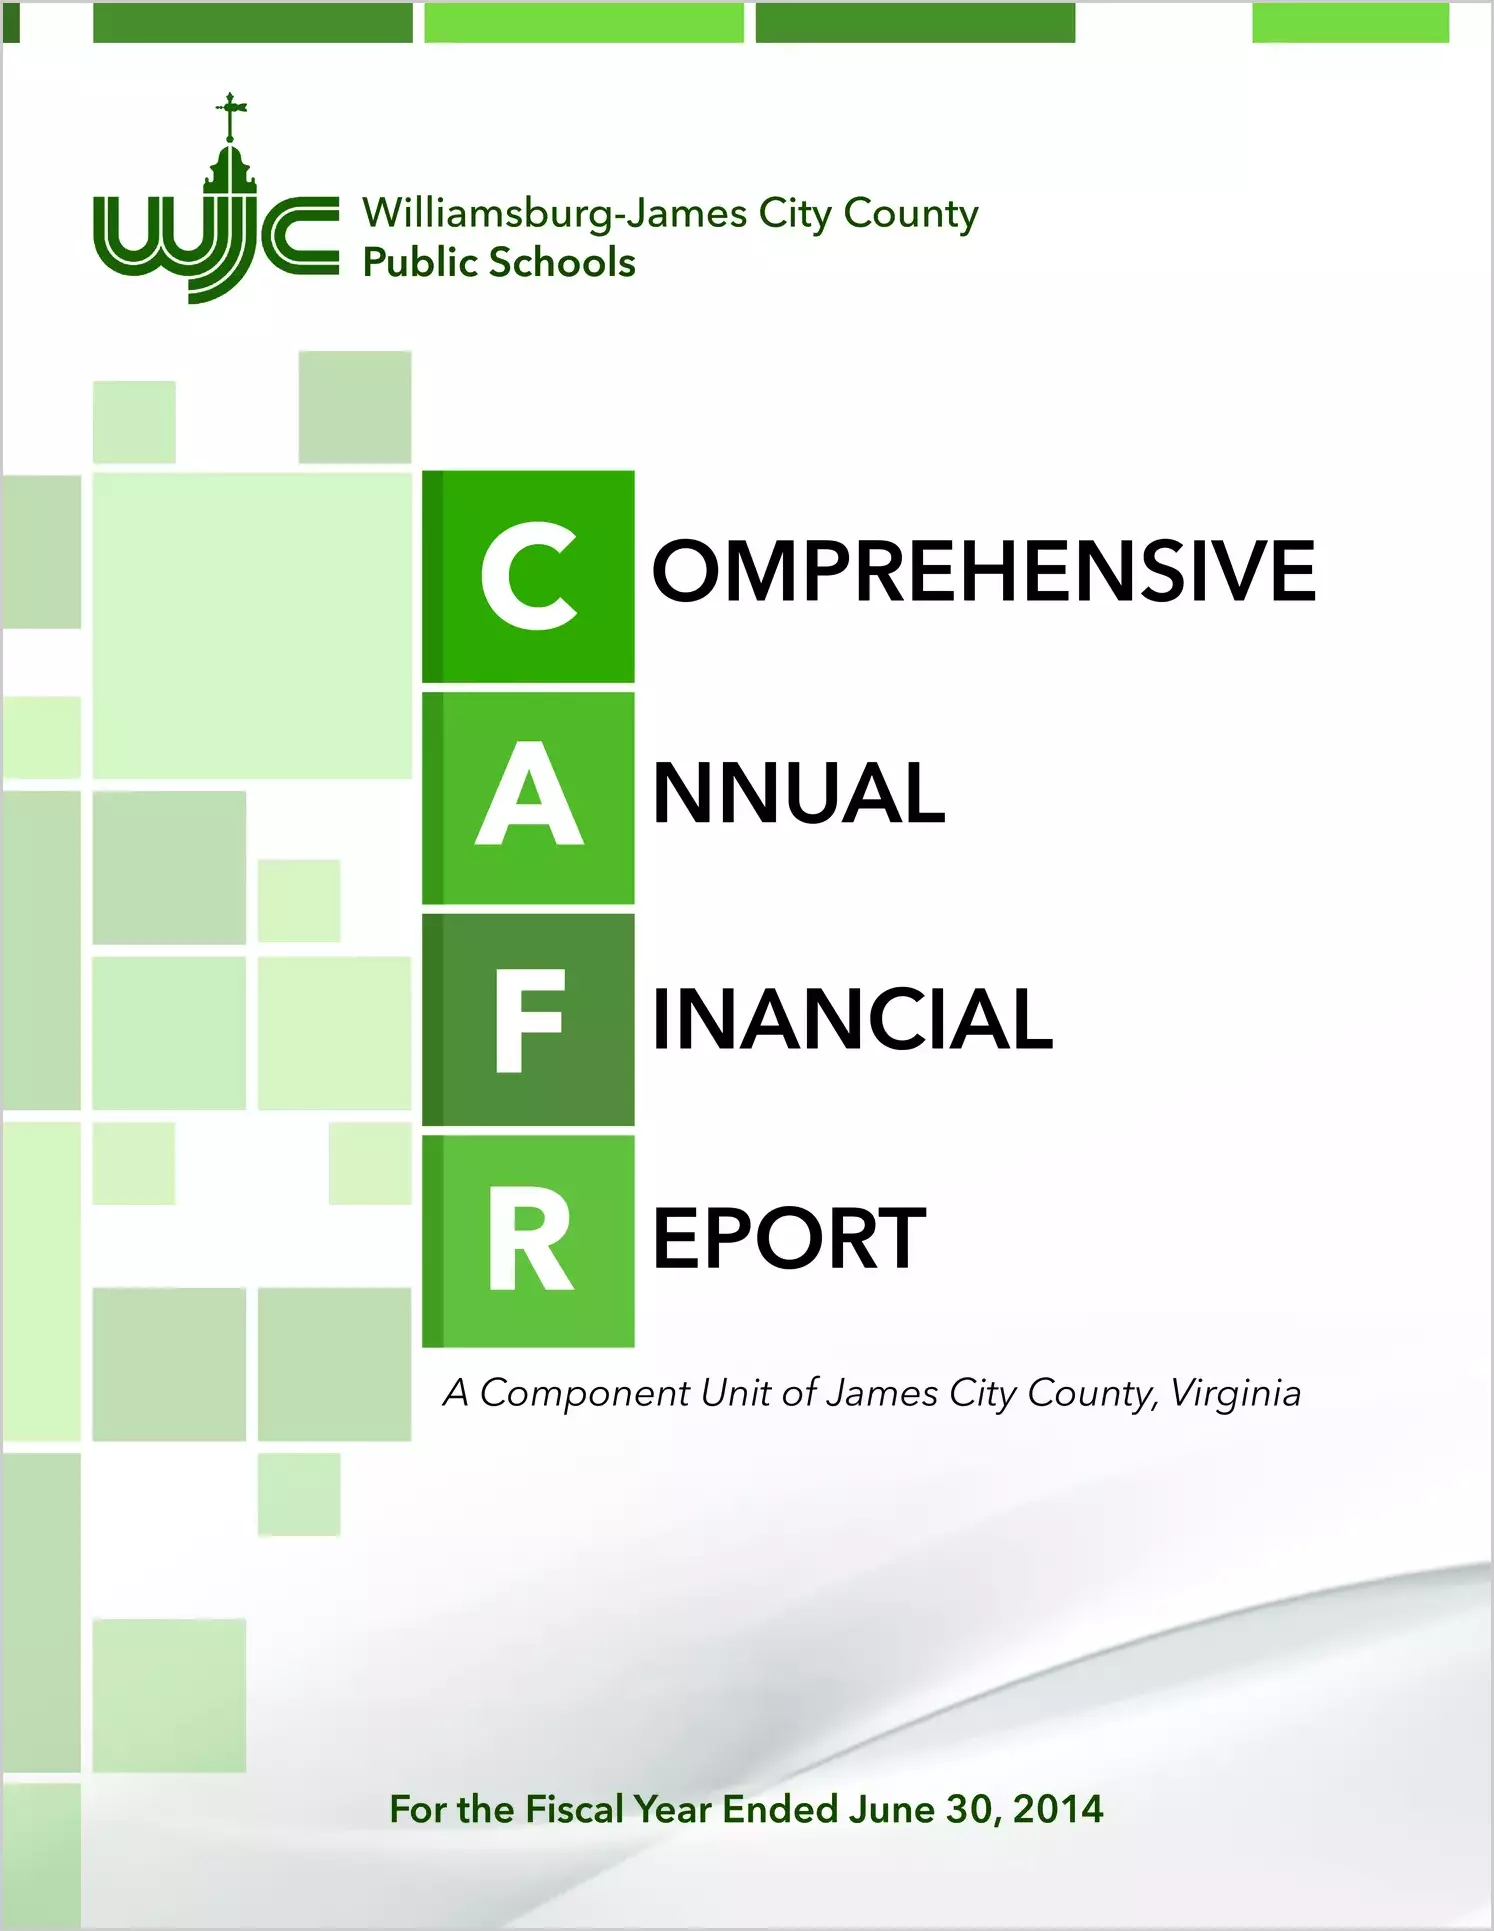 2014 Public Schools Annual Financial Report for County of James City